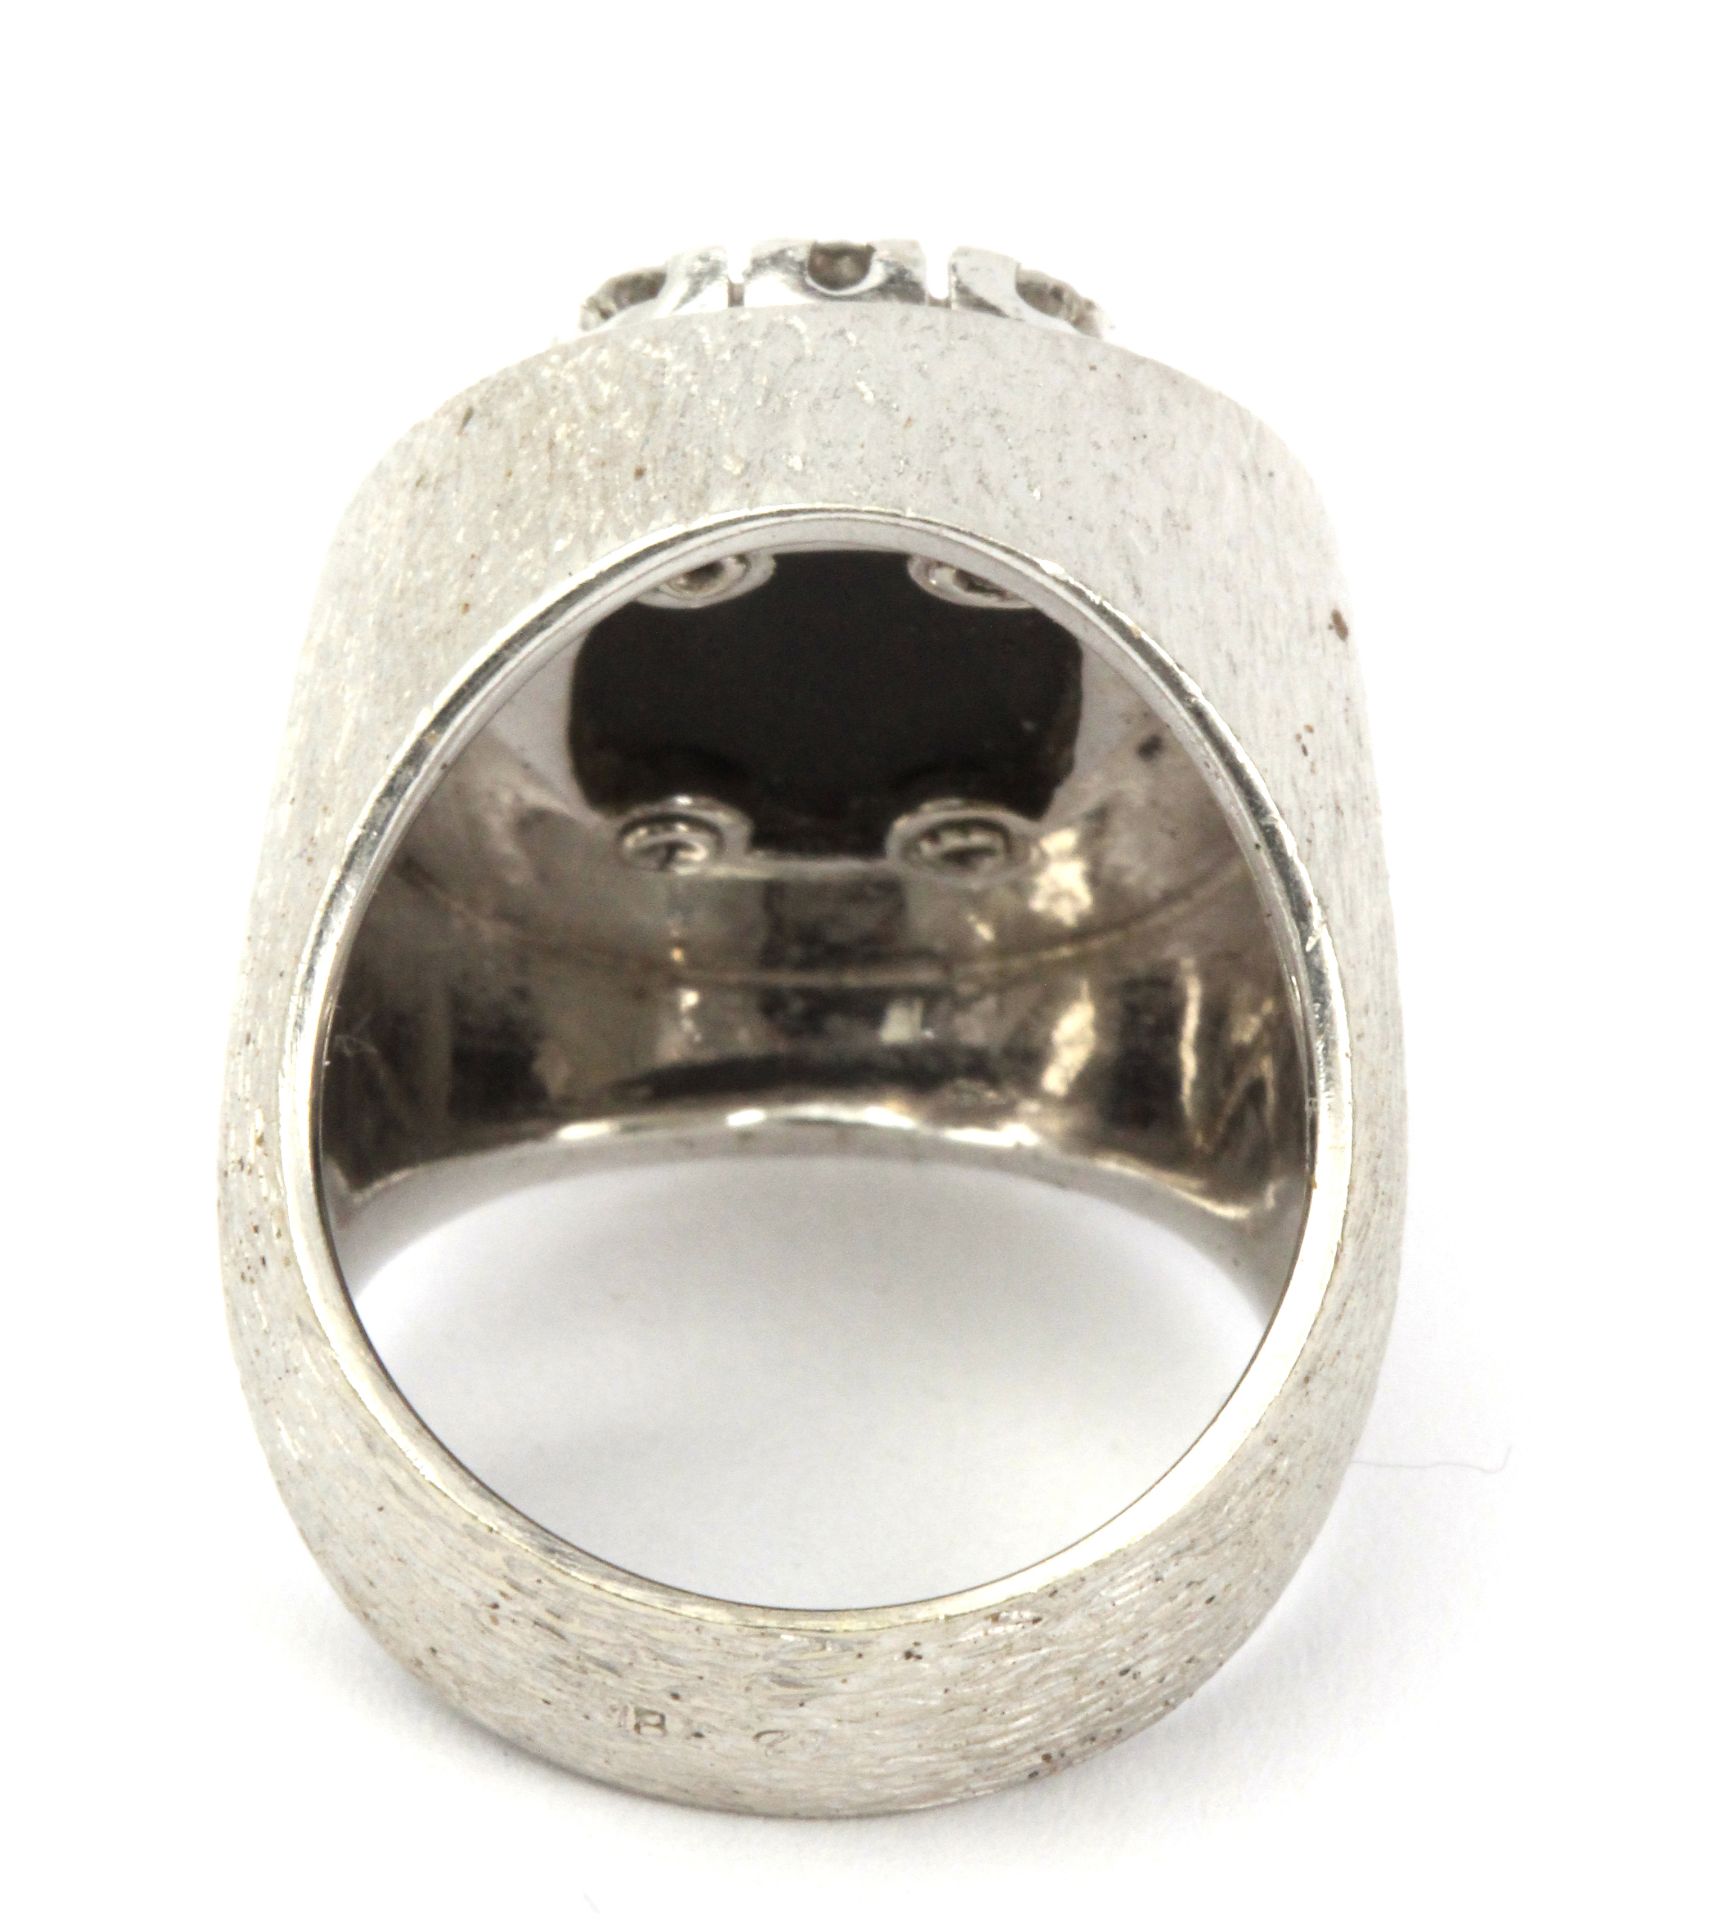 A diamond signet ring with an onyx plaque and 18k. white gold setting - Image 4 of 4